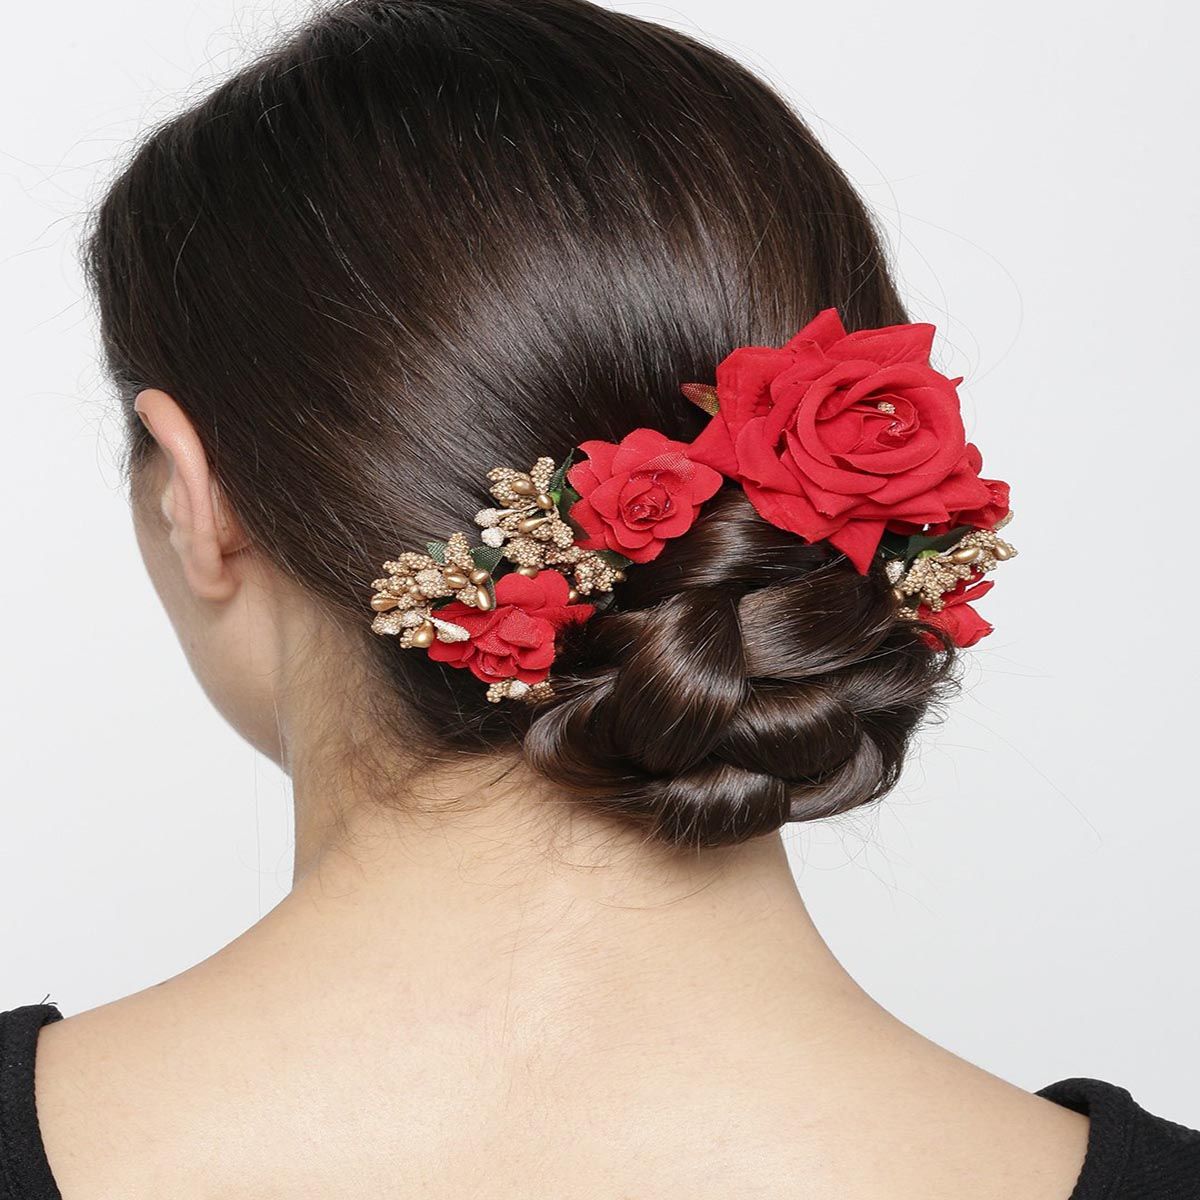 Hairstyle with red rose 🌹 - YouTube